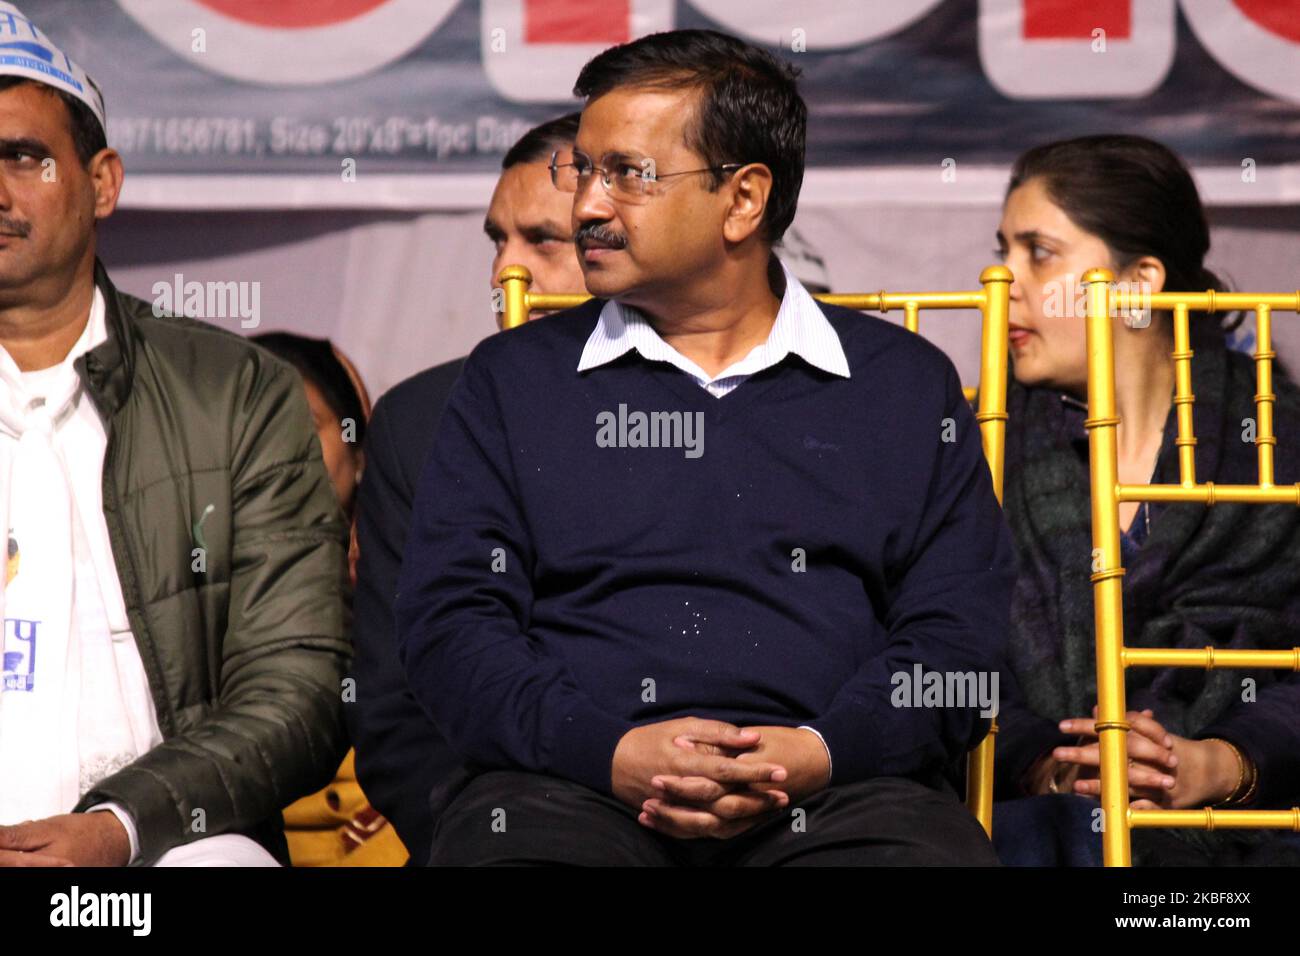 Aam Aadmi Party National convener and Delhi Chief Minister Arvind Kejriwal is seen addressing a public gathering during campaigning ahead of Delhi Assembly elections at Nangloi Jat on January 24, 2020 in New Delhi, India. (Photo by Mayank Makhija/NurPhoto) Stock Photo